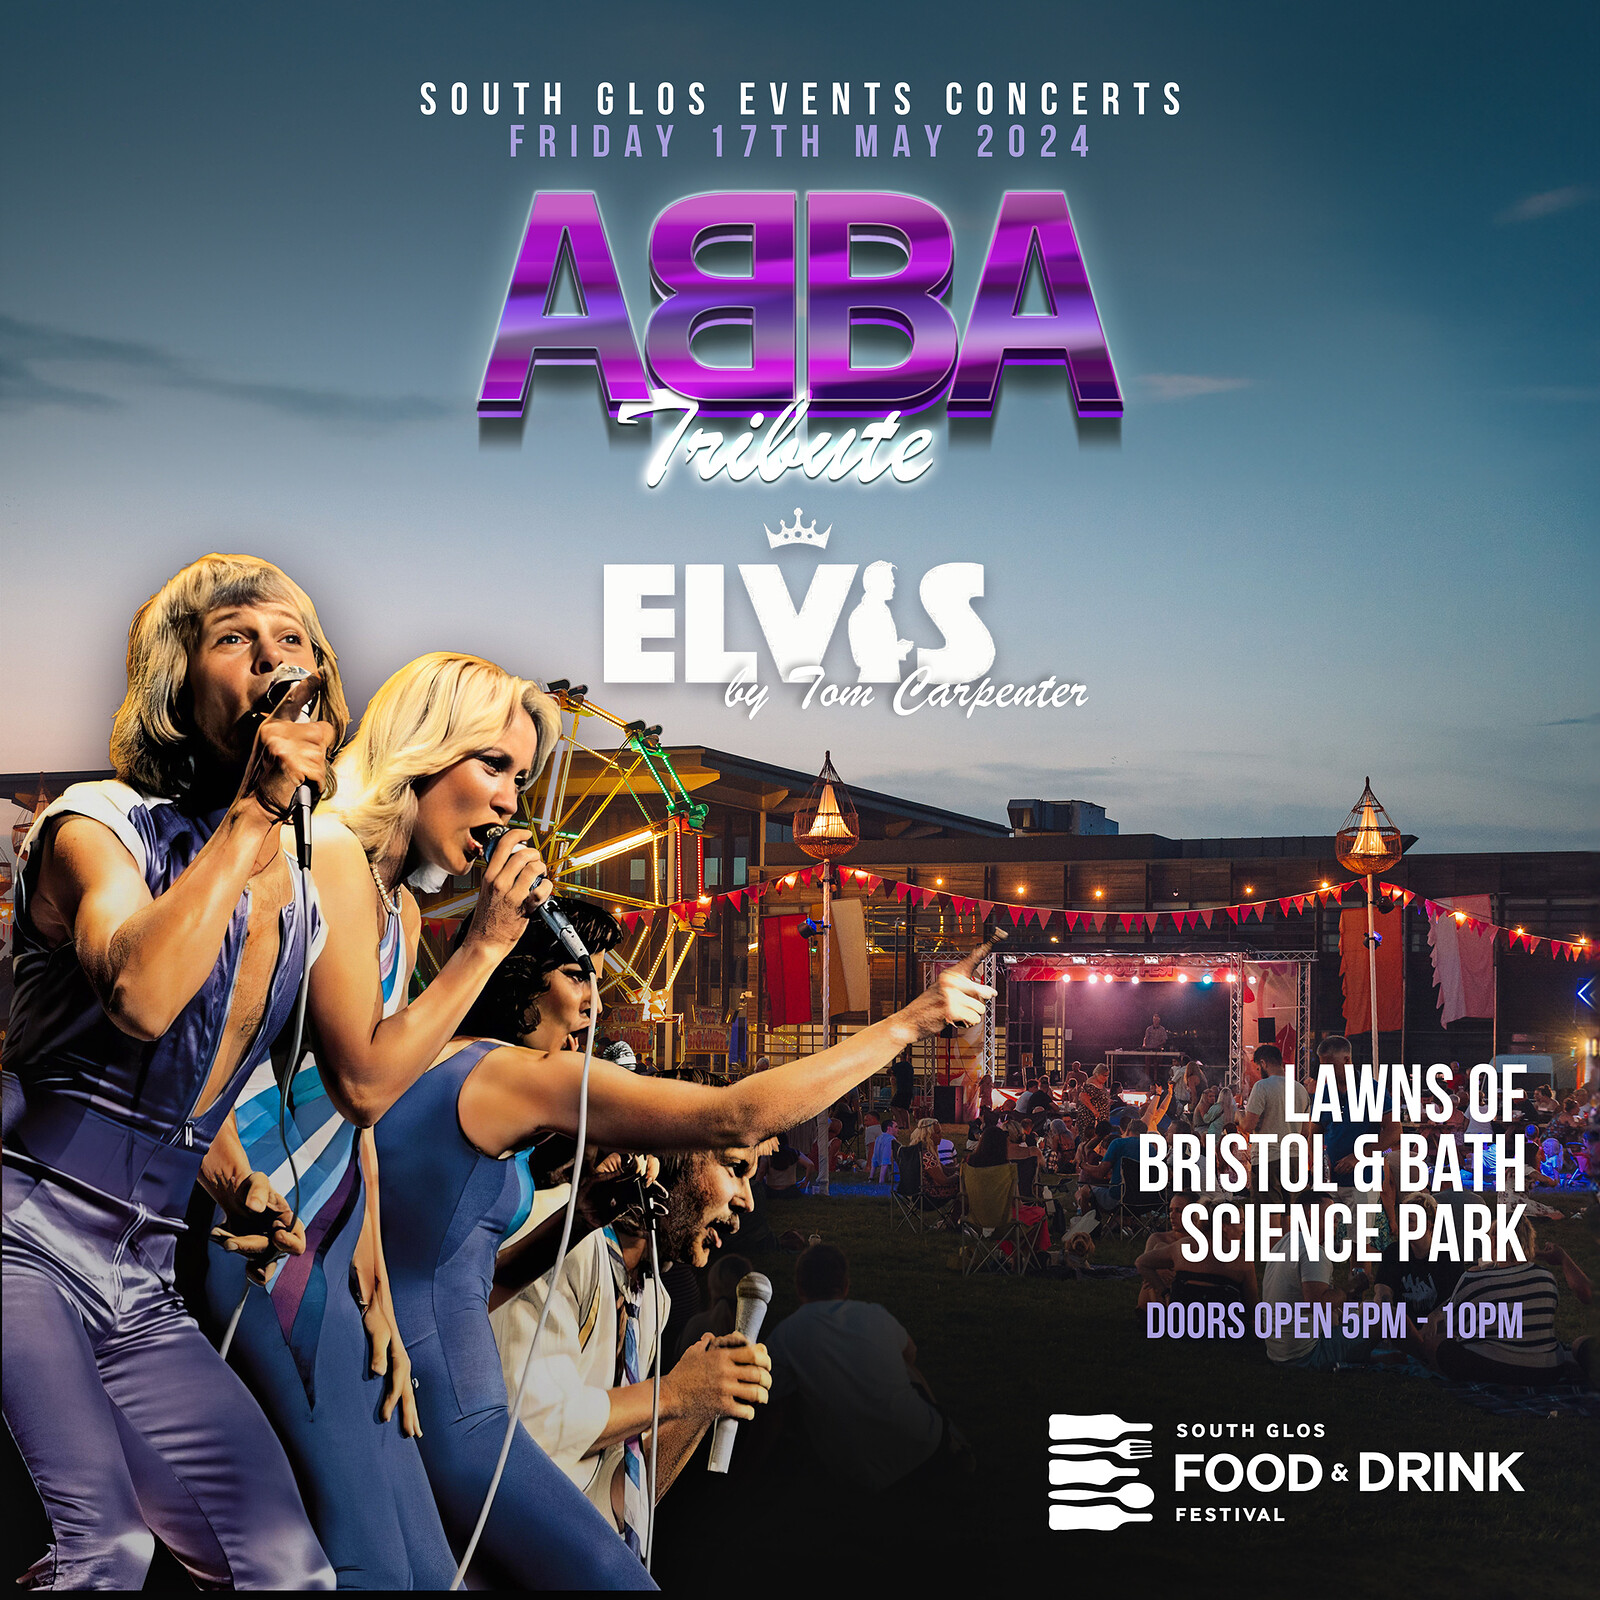 ABBA Tribute with Elvis by Tom Carpenter at Bristol & Bath Science Park